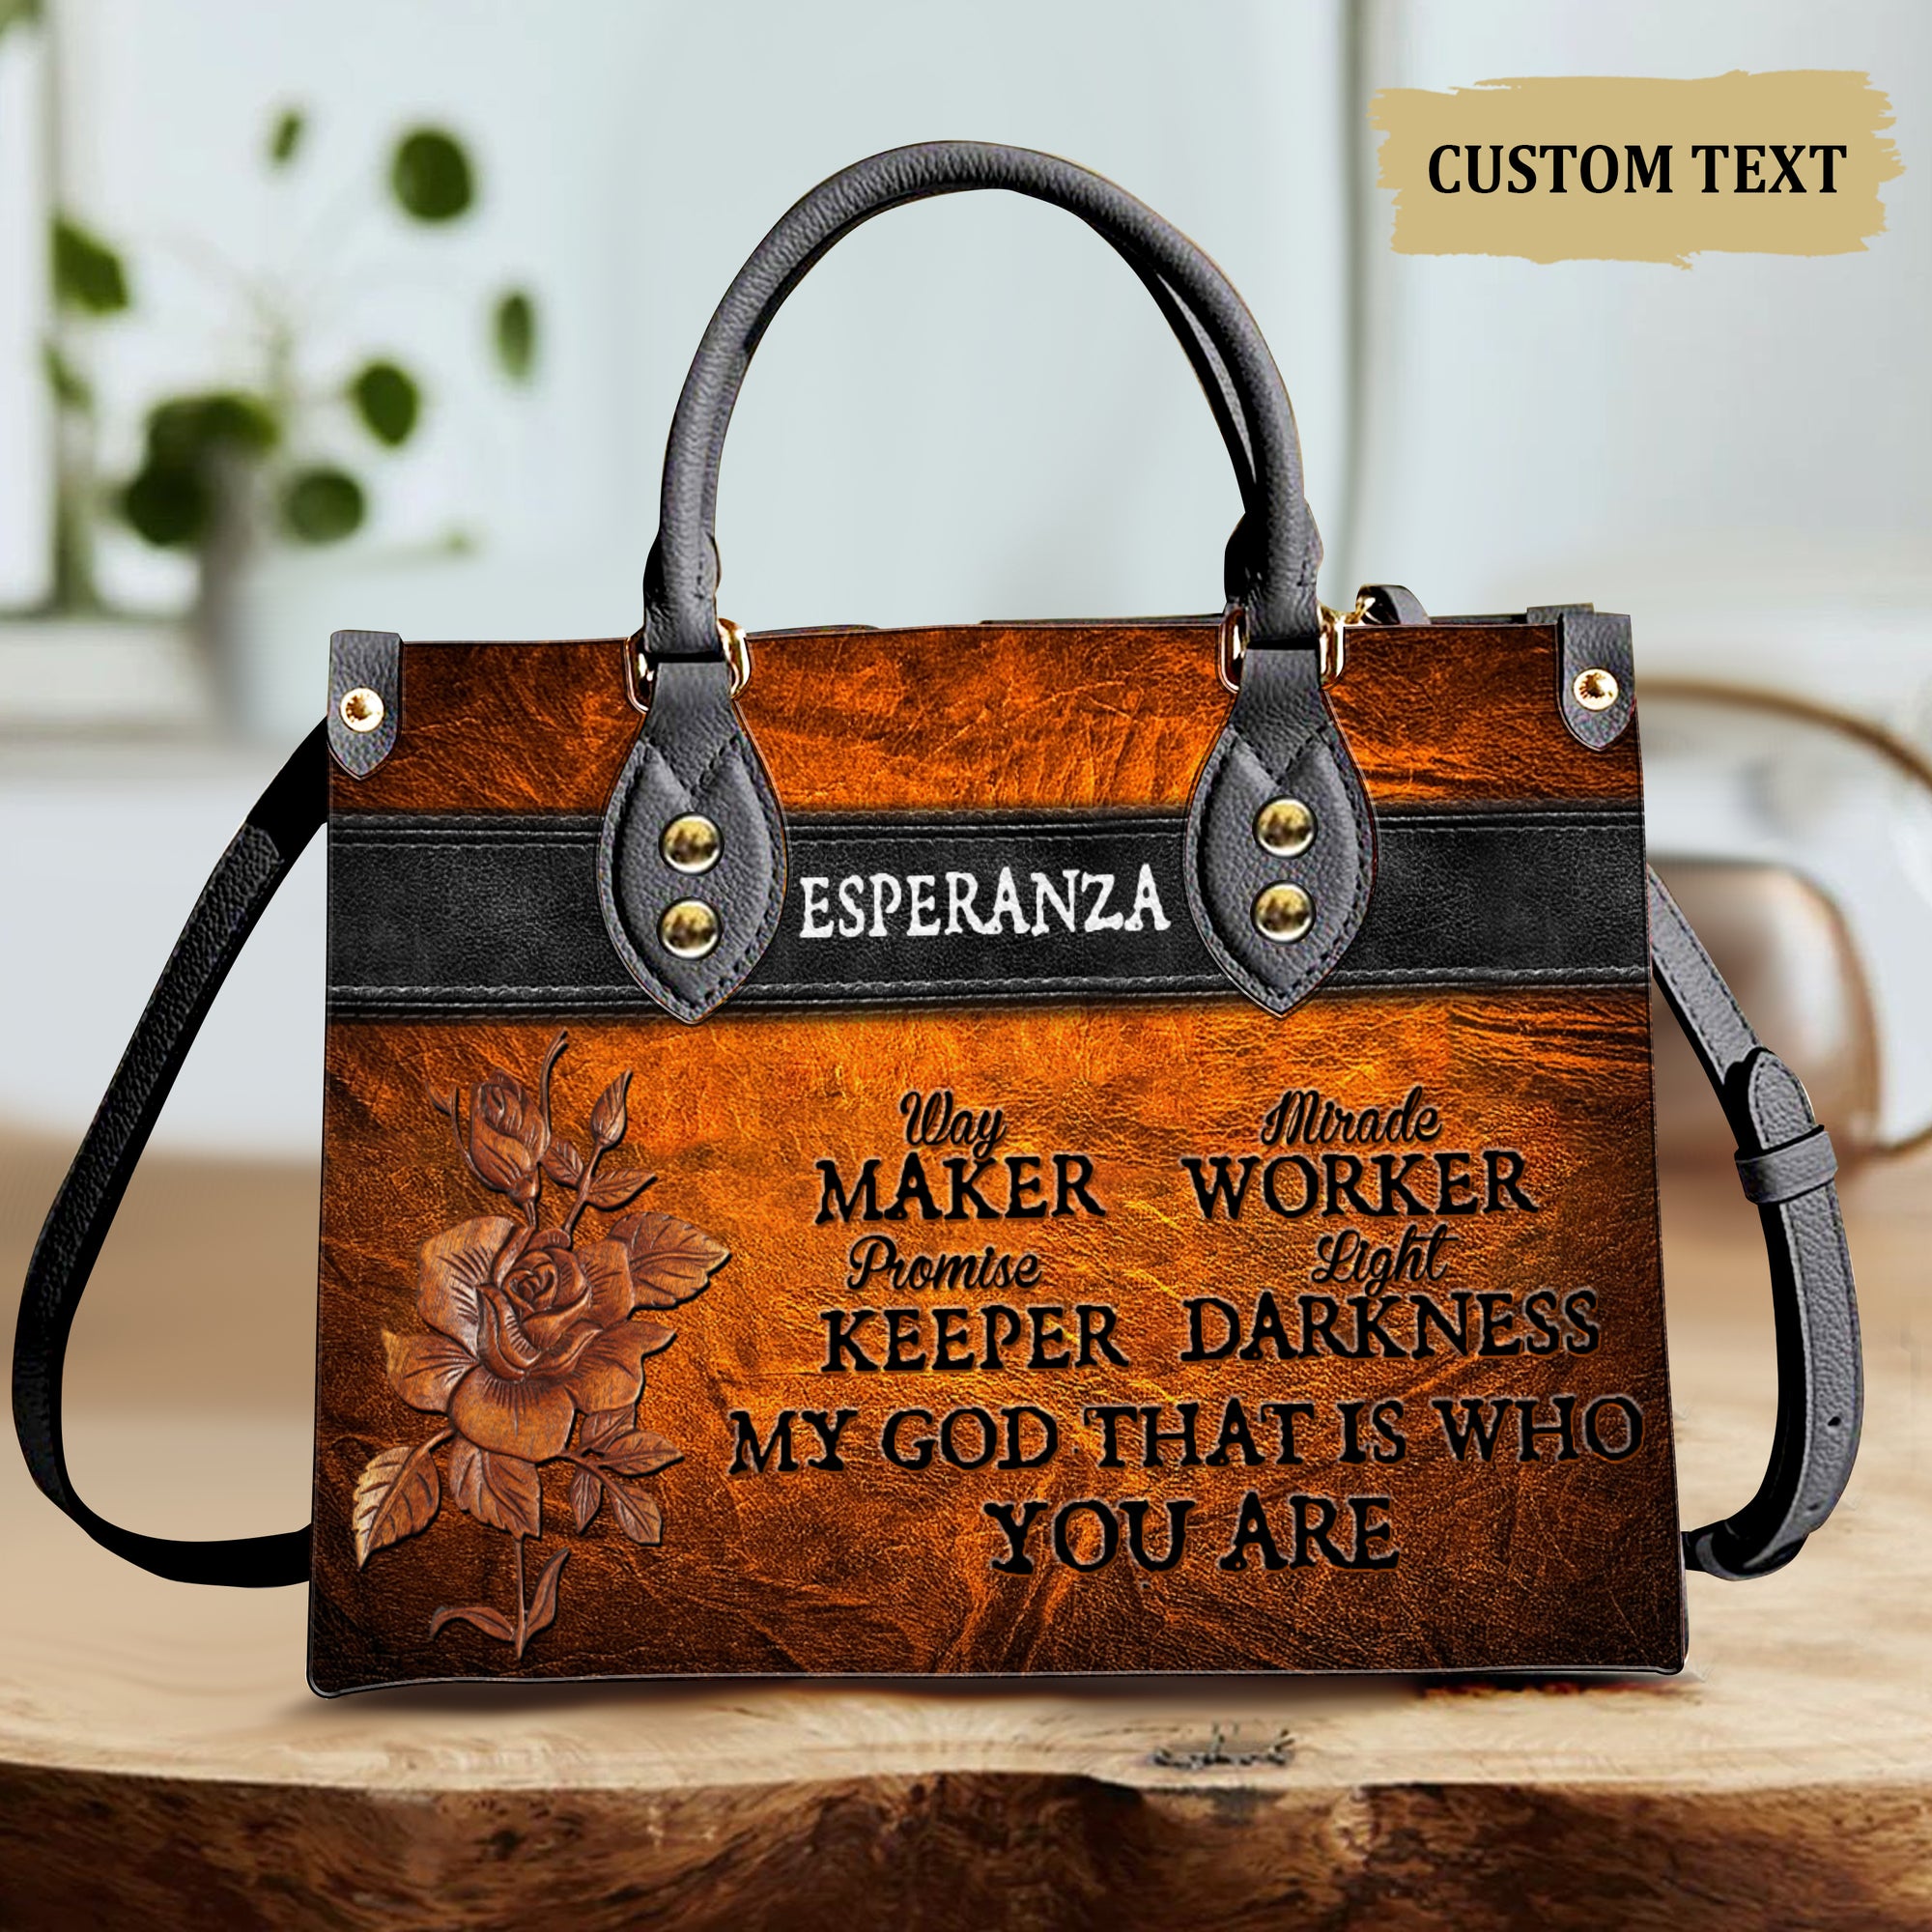 My God That Is Who You Are Inspirational Quotes, Religious Gift Personalized Leather Handbag